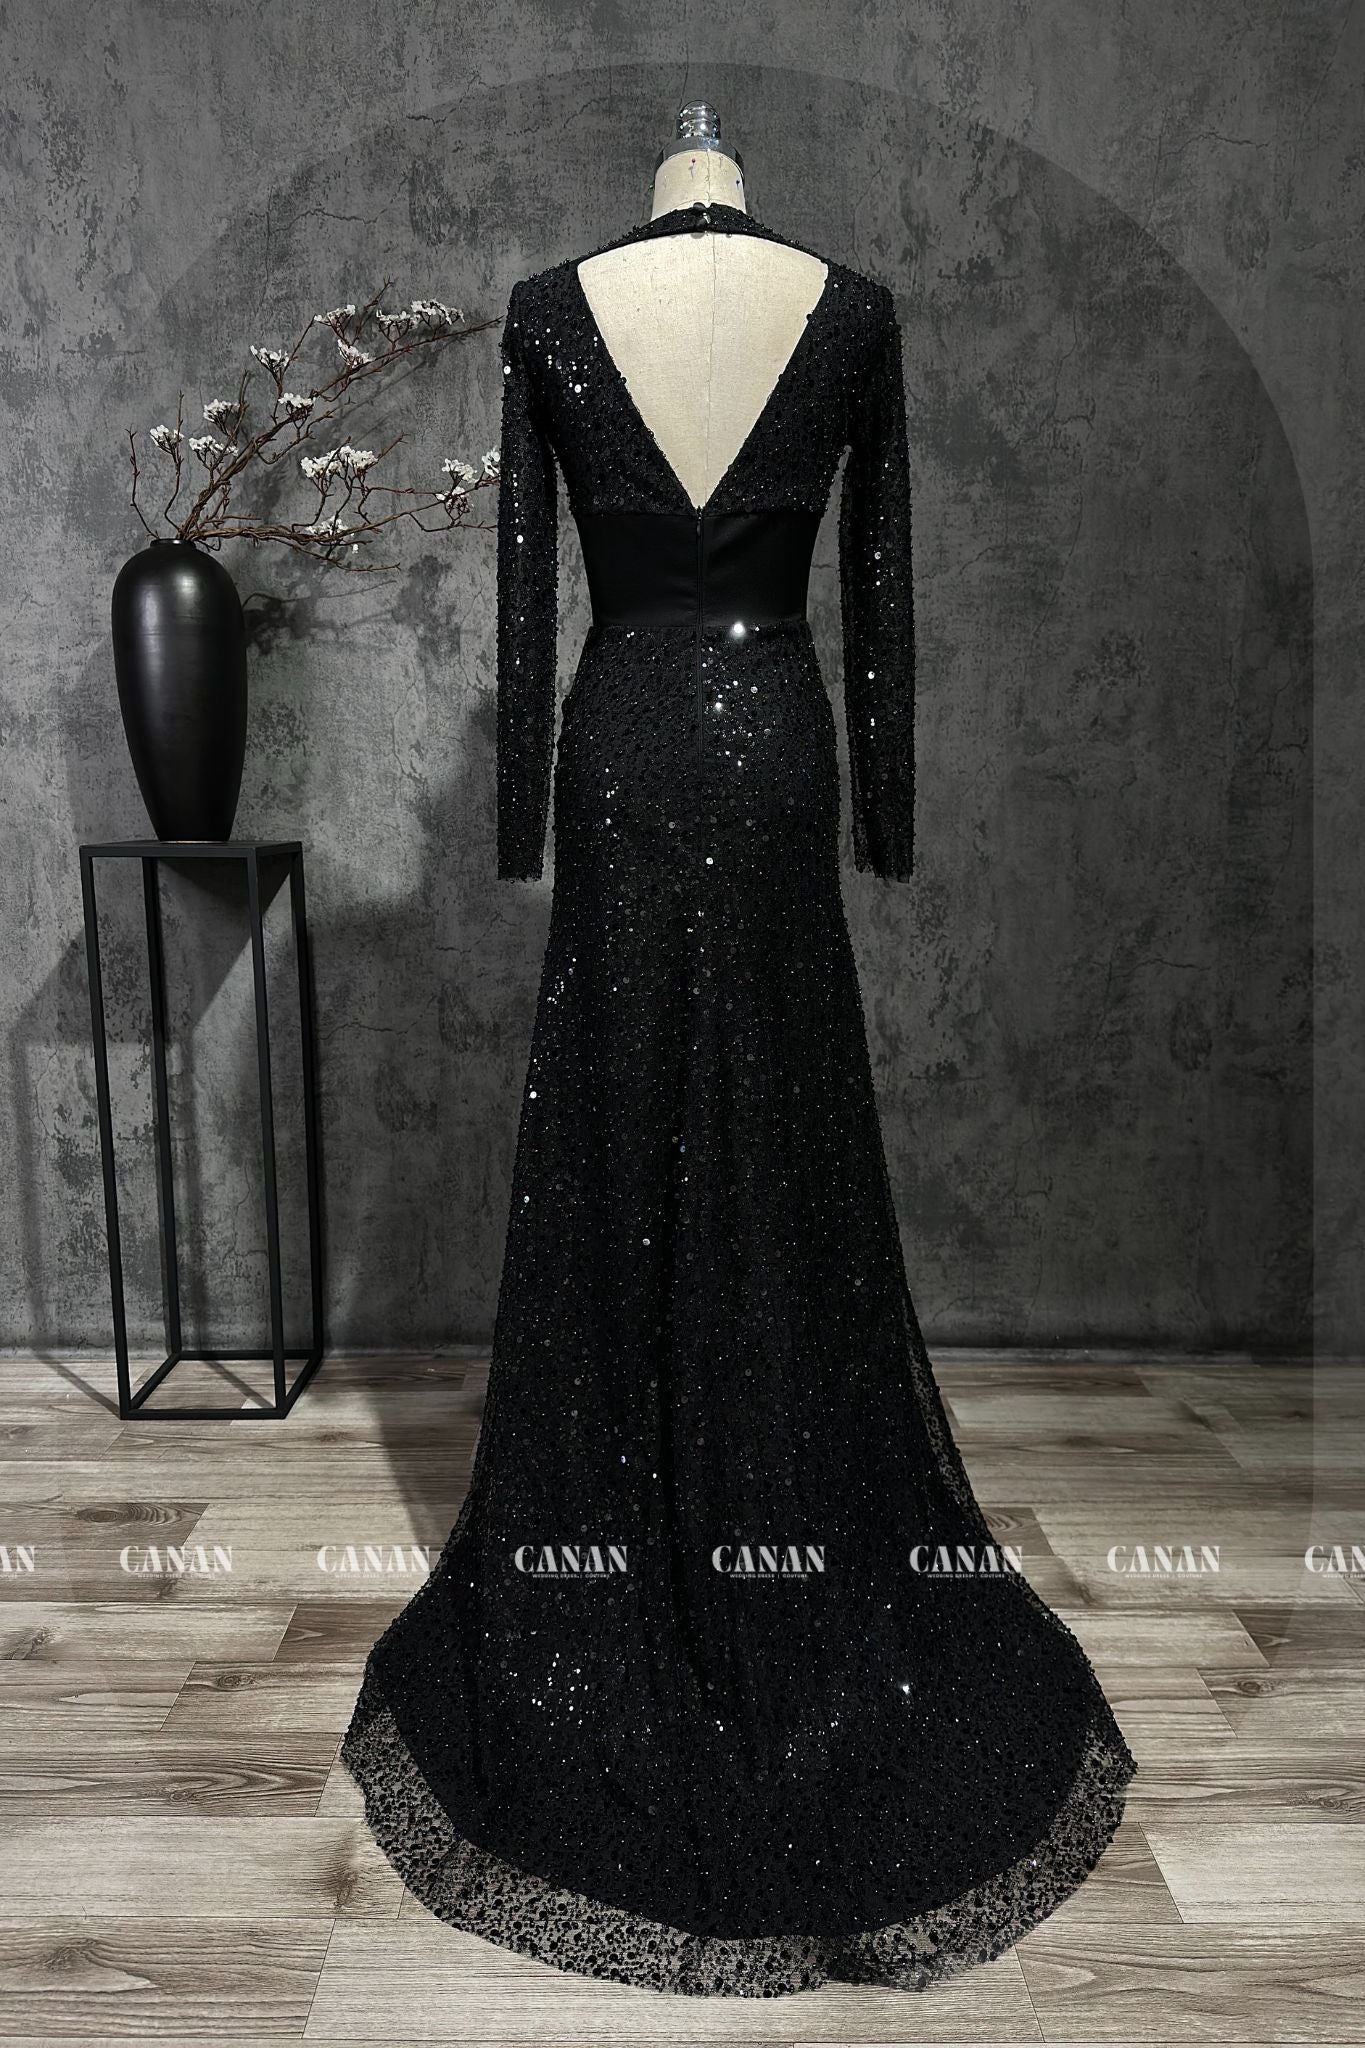 Elegant and Classy Black Sheath Dress with Sparkling Long Sleeves